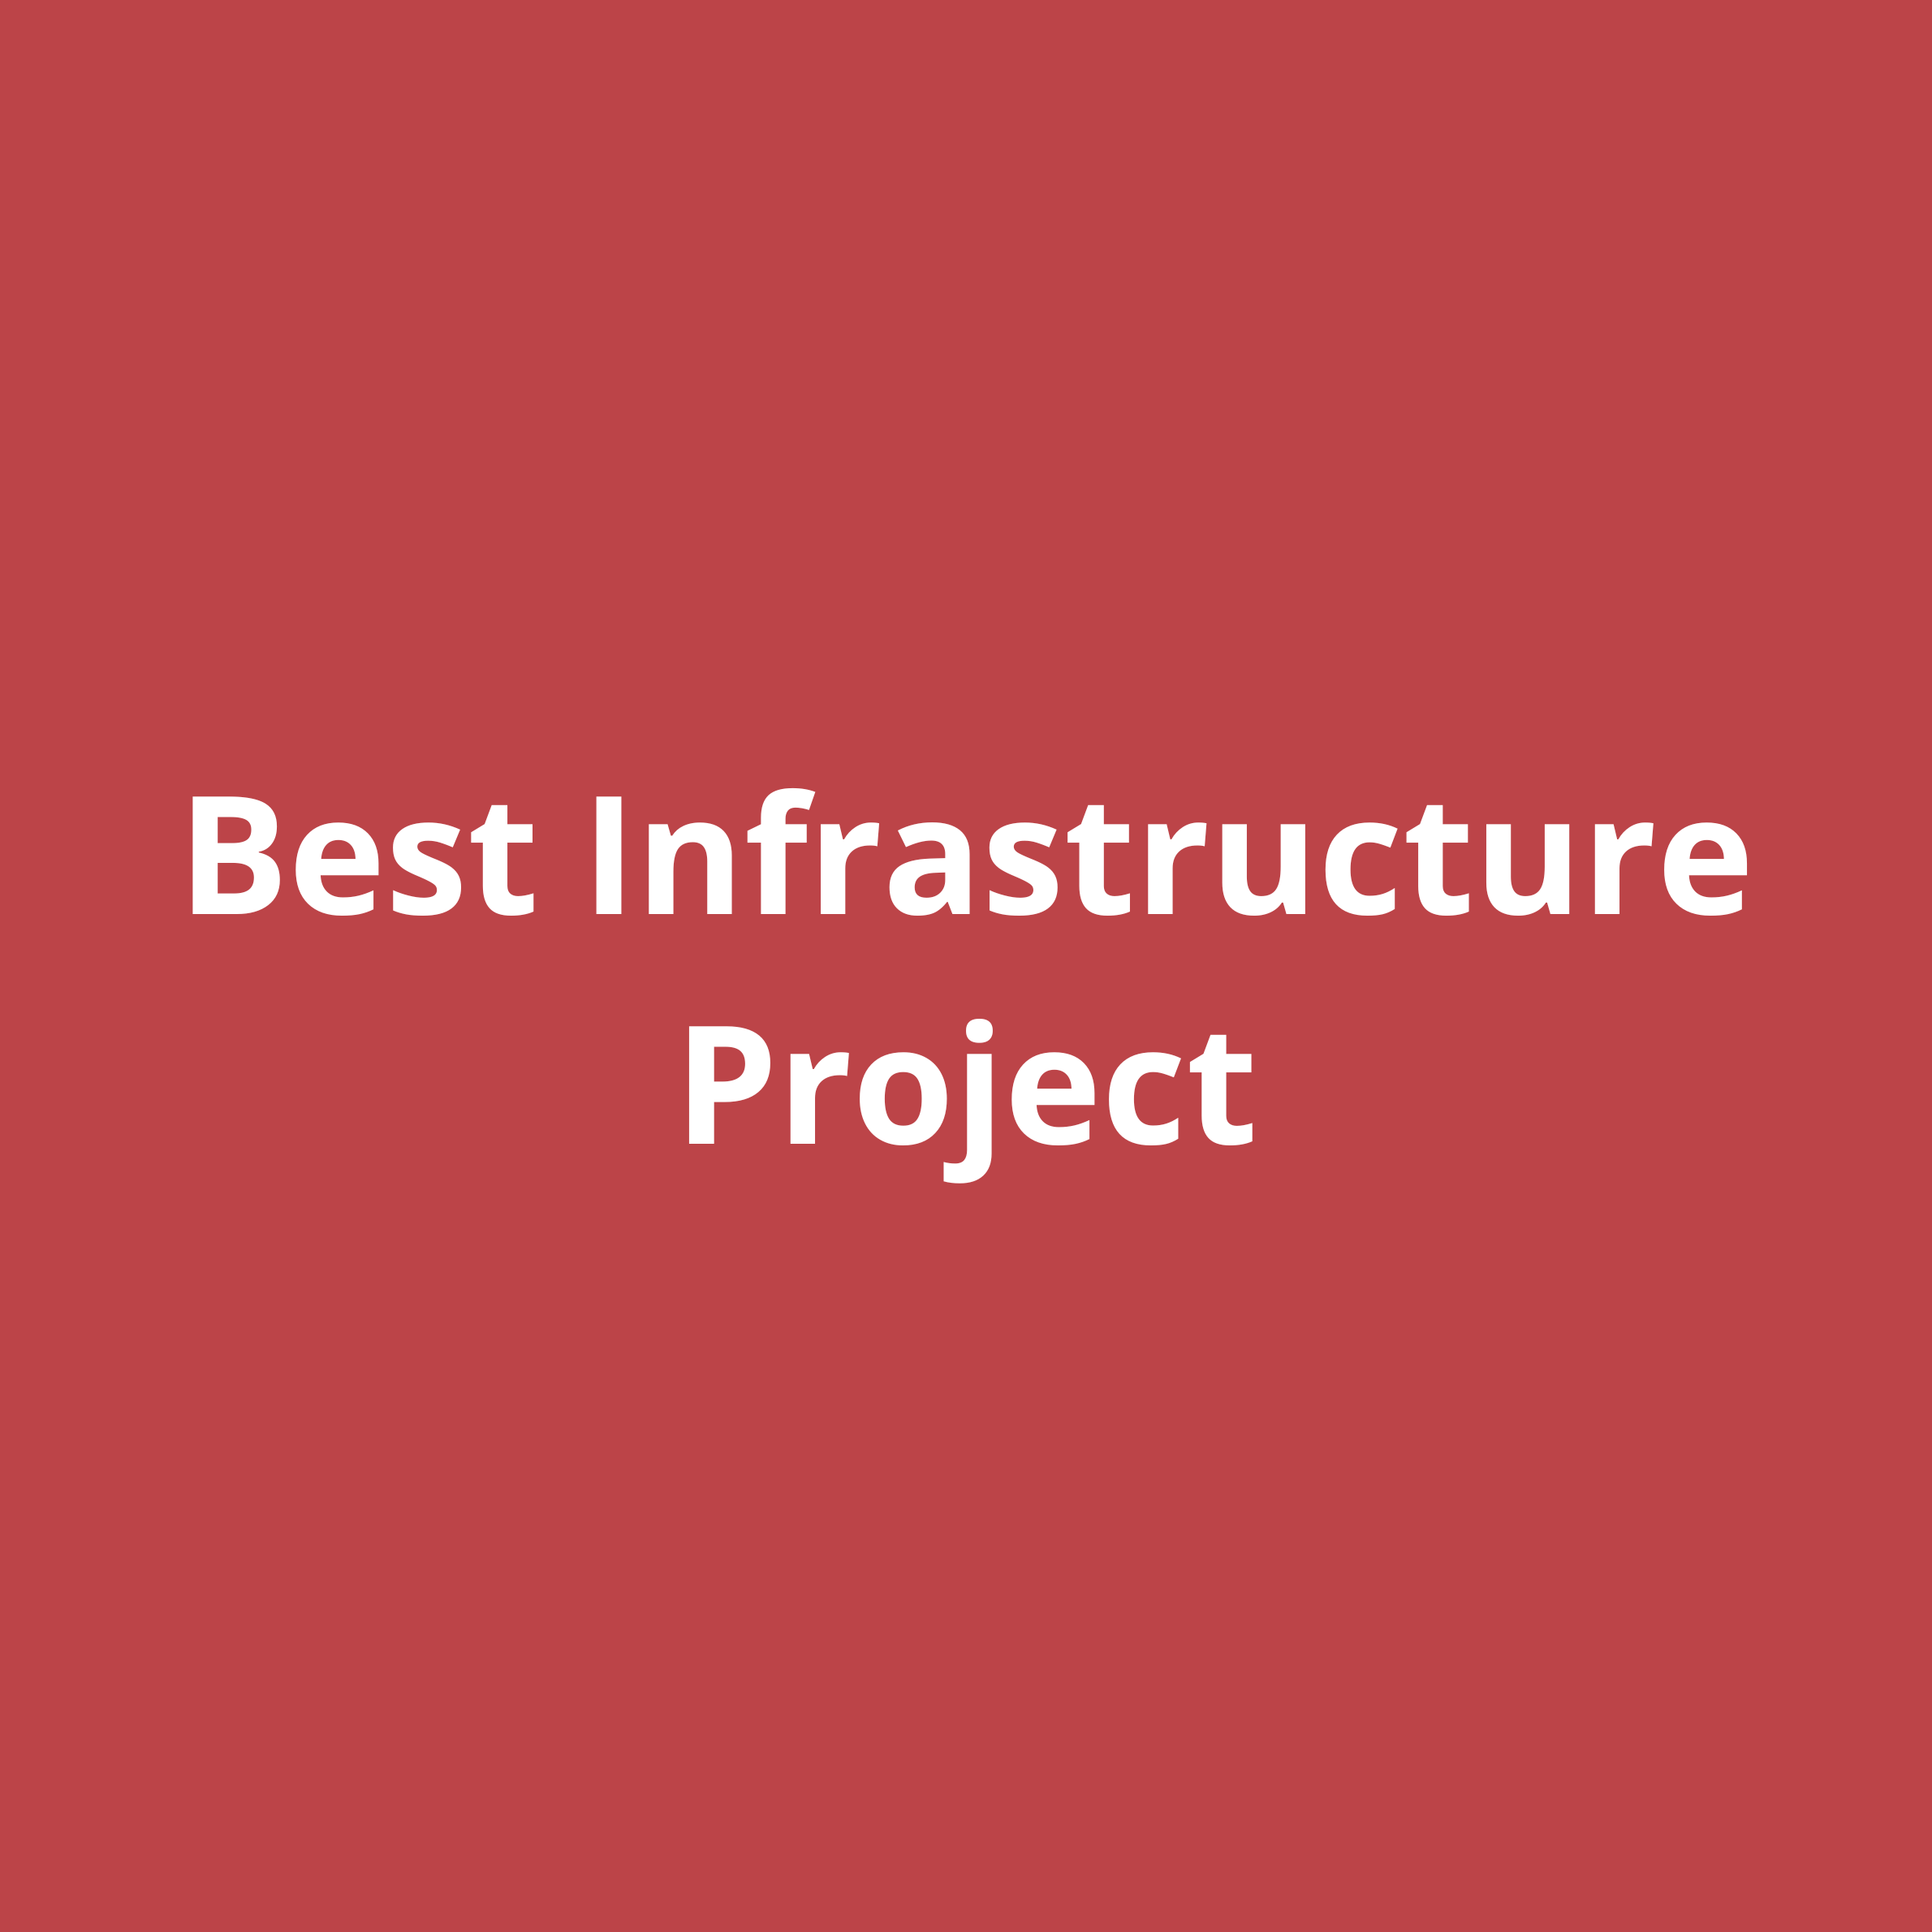 Best infrastructure project